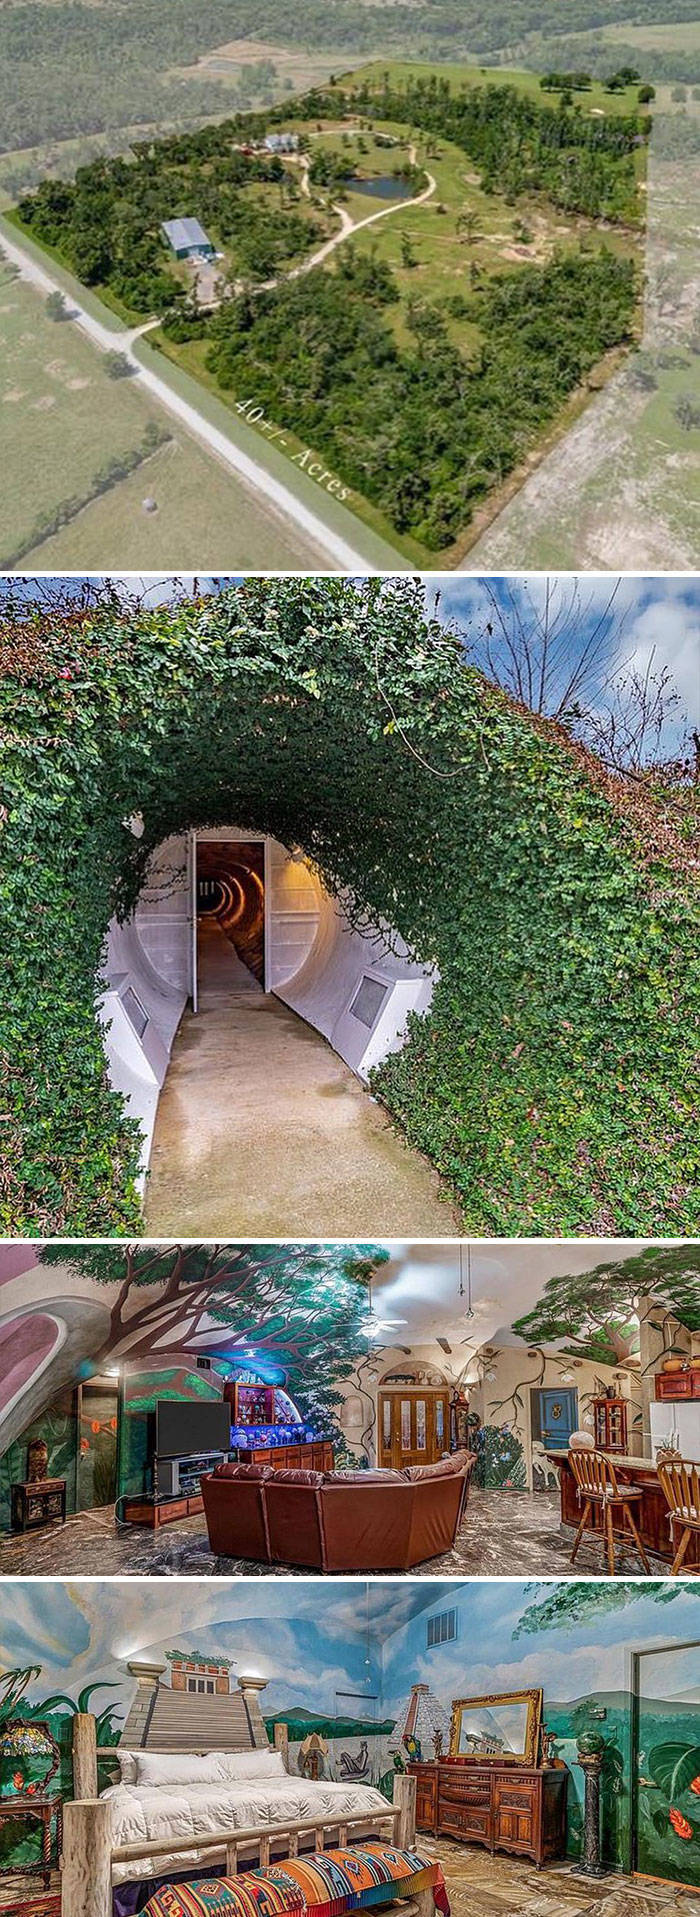 Real Estate Listings Can Be Real Weird…